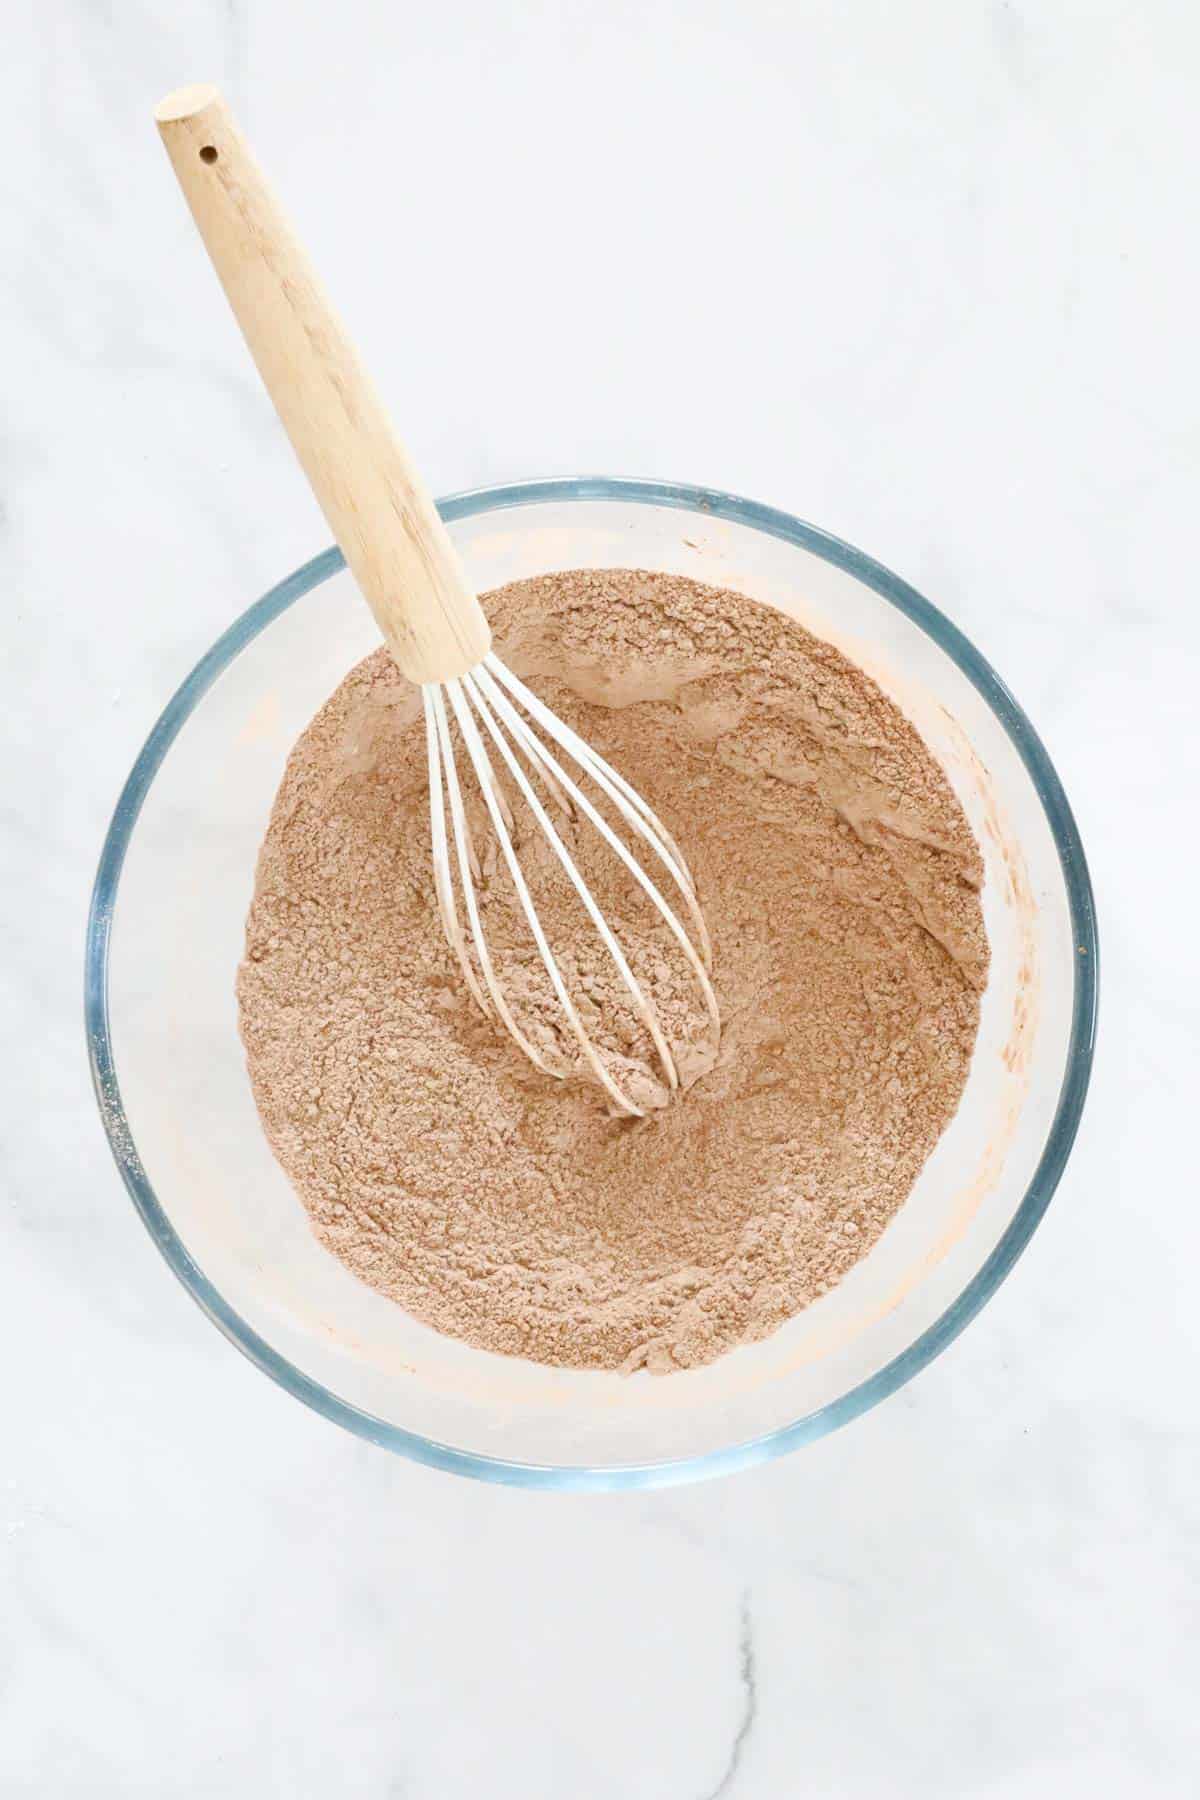 Flour and cocoa powder whisked together in a mixing bowl.